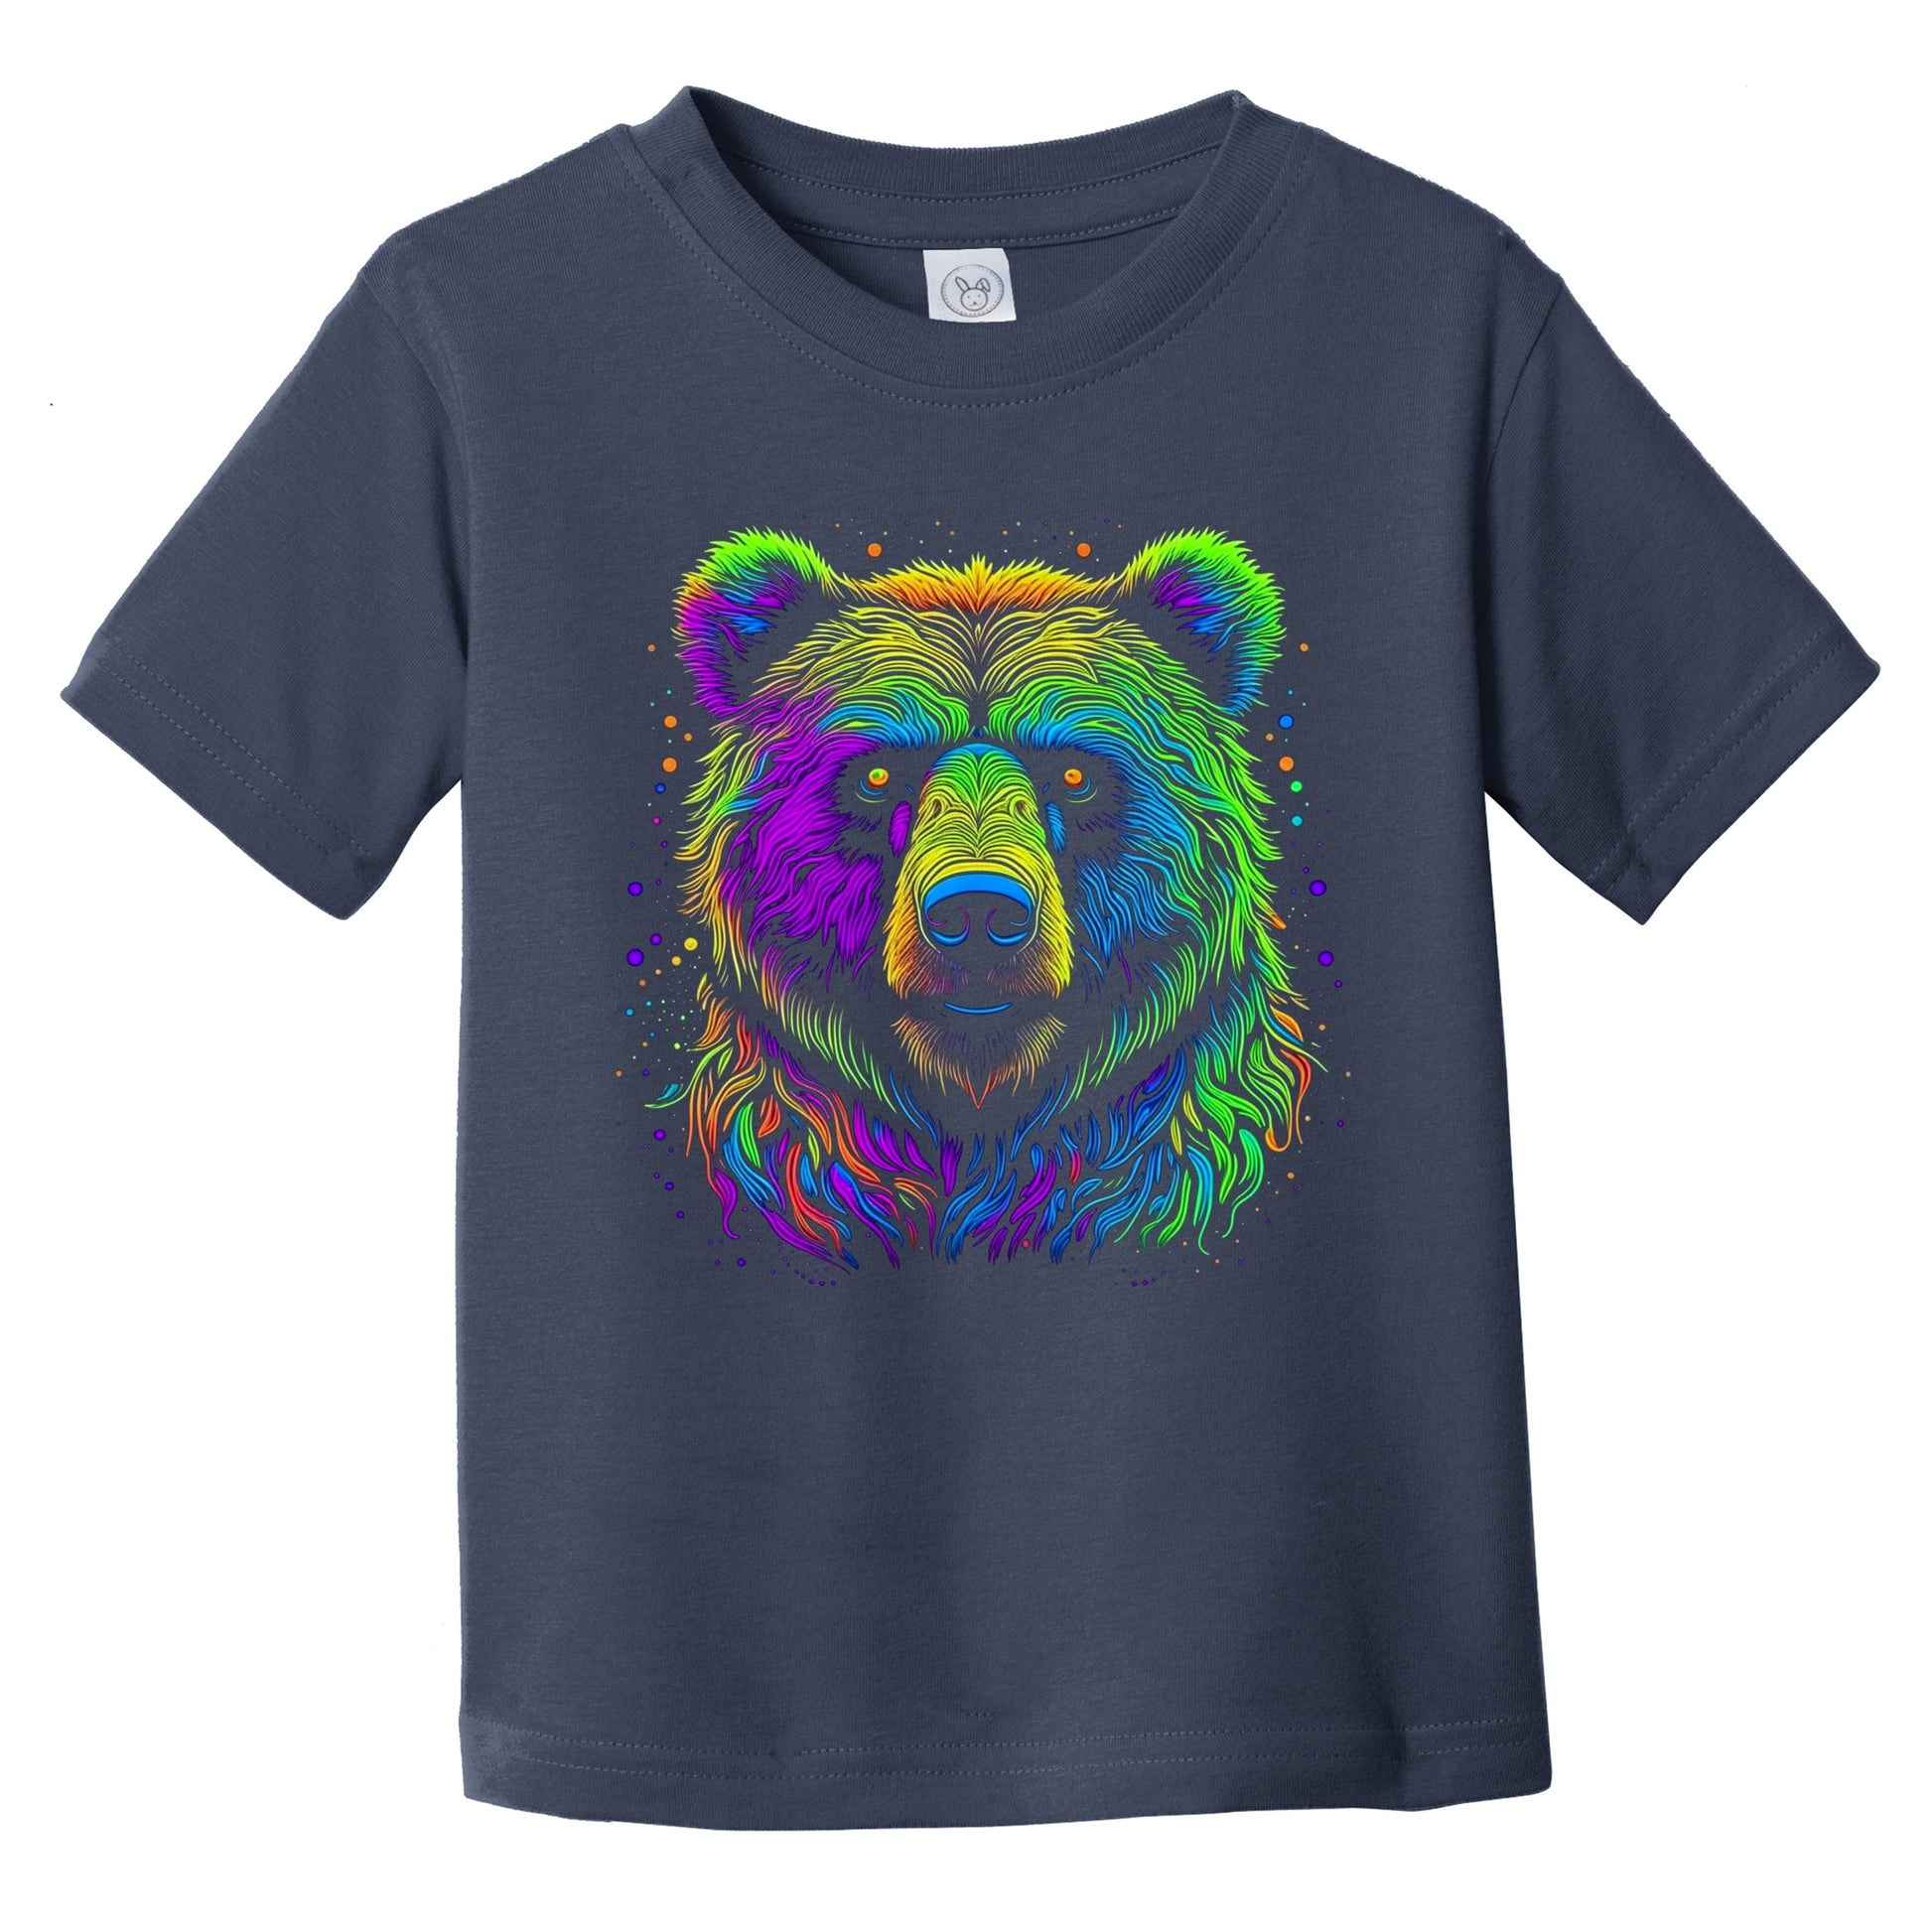 Colorful Bright Grizzly Bear Vibrant Psychedelic Animal Art Infant Toddler T-Shirt